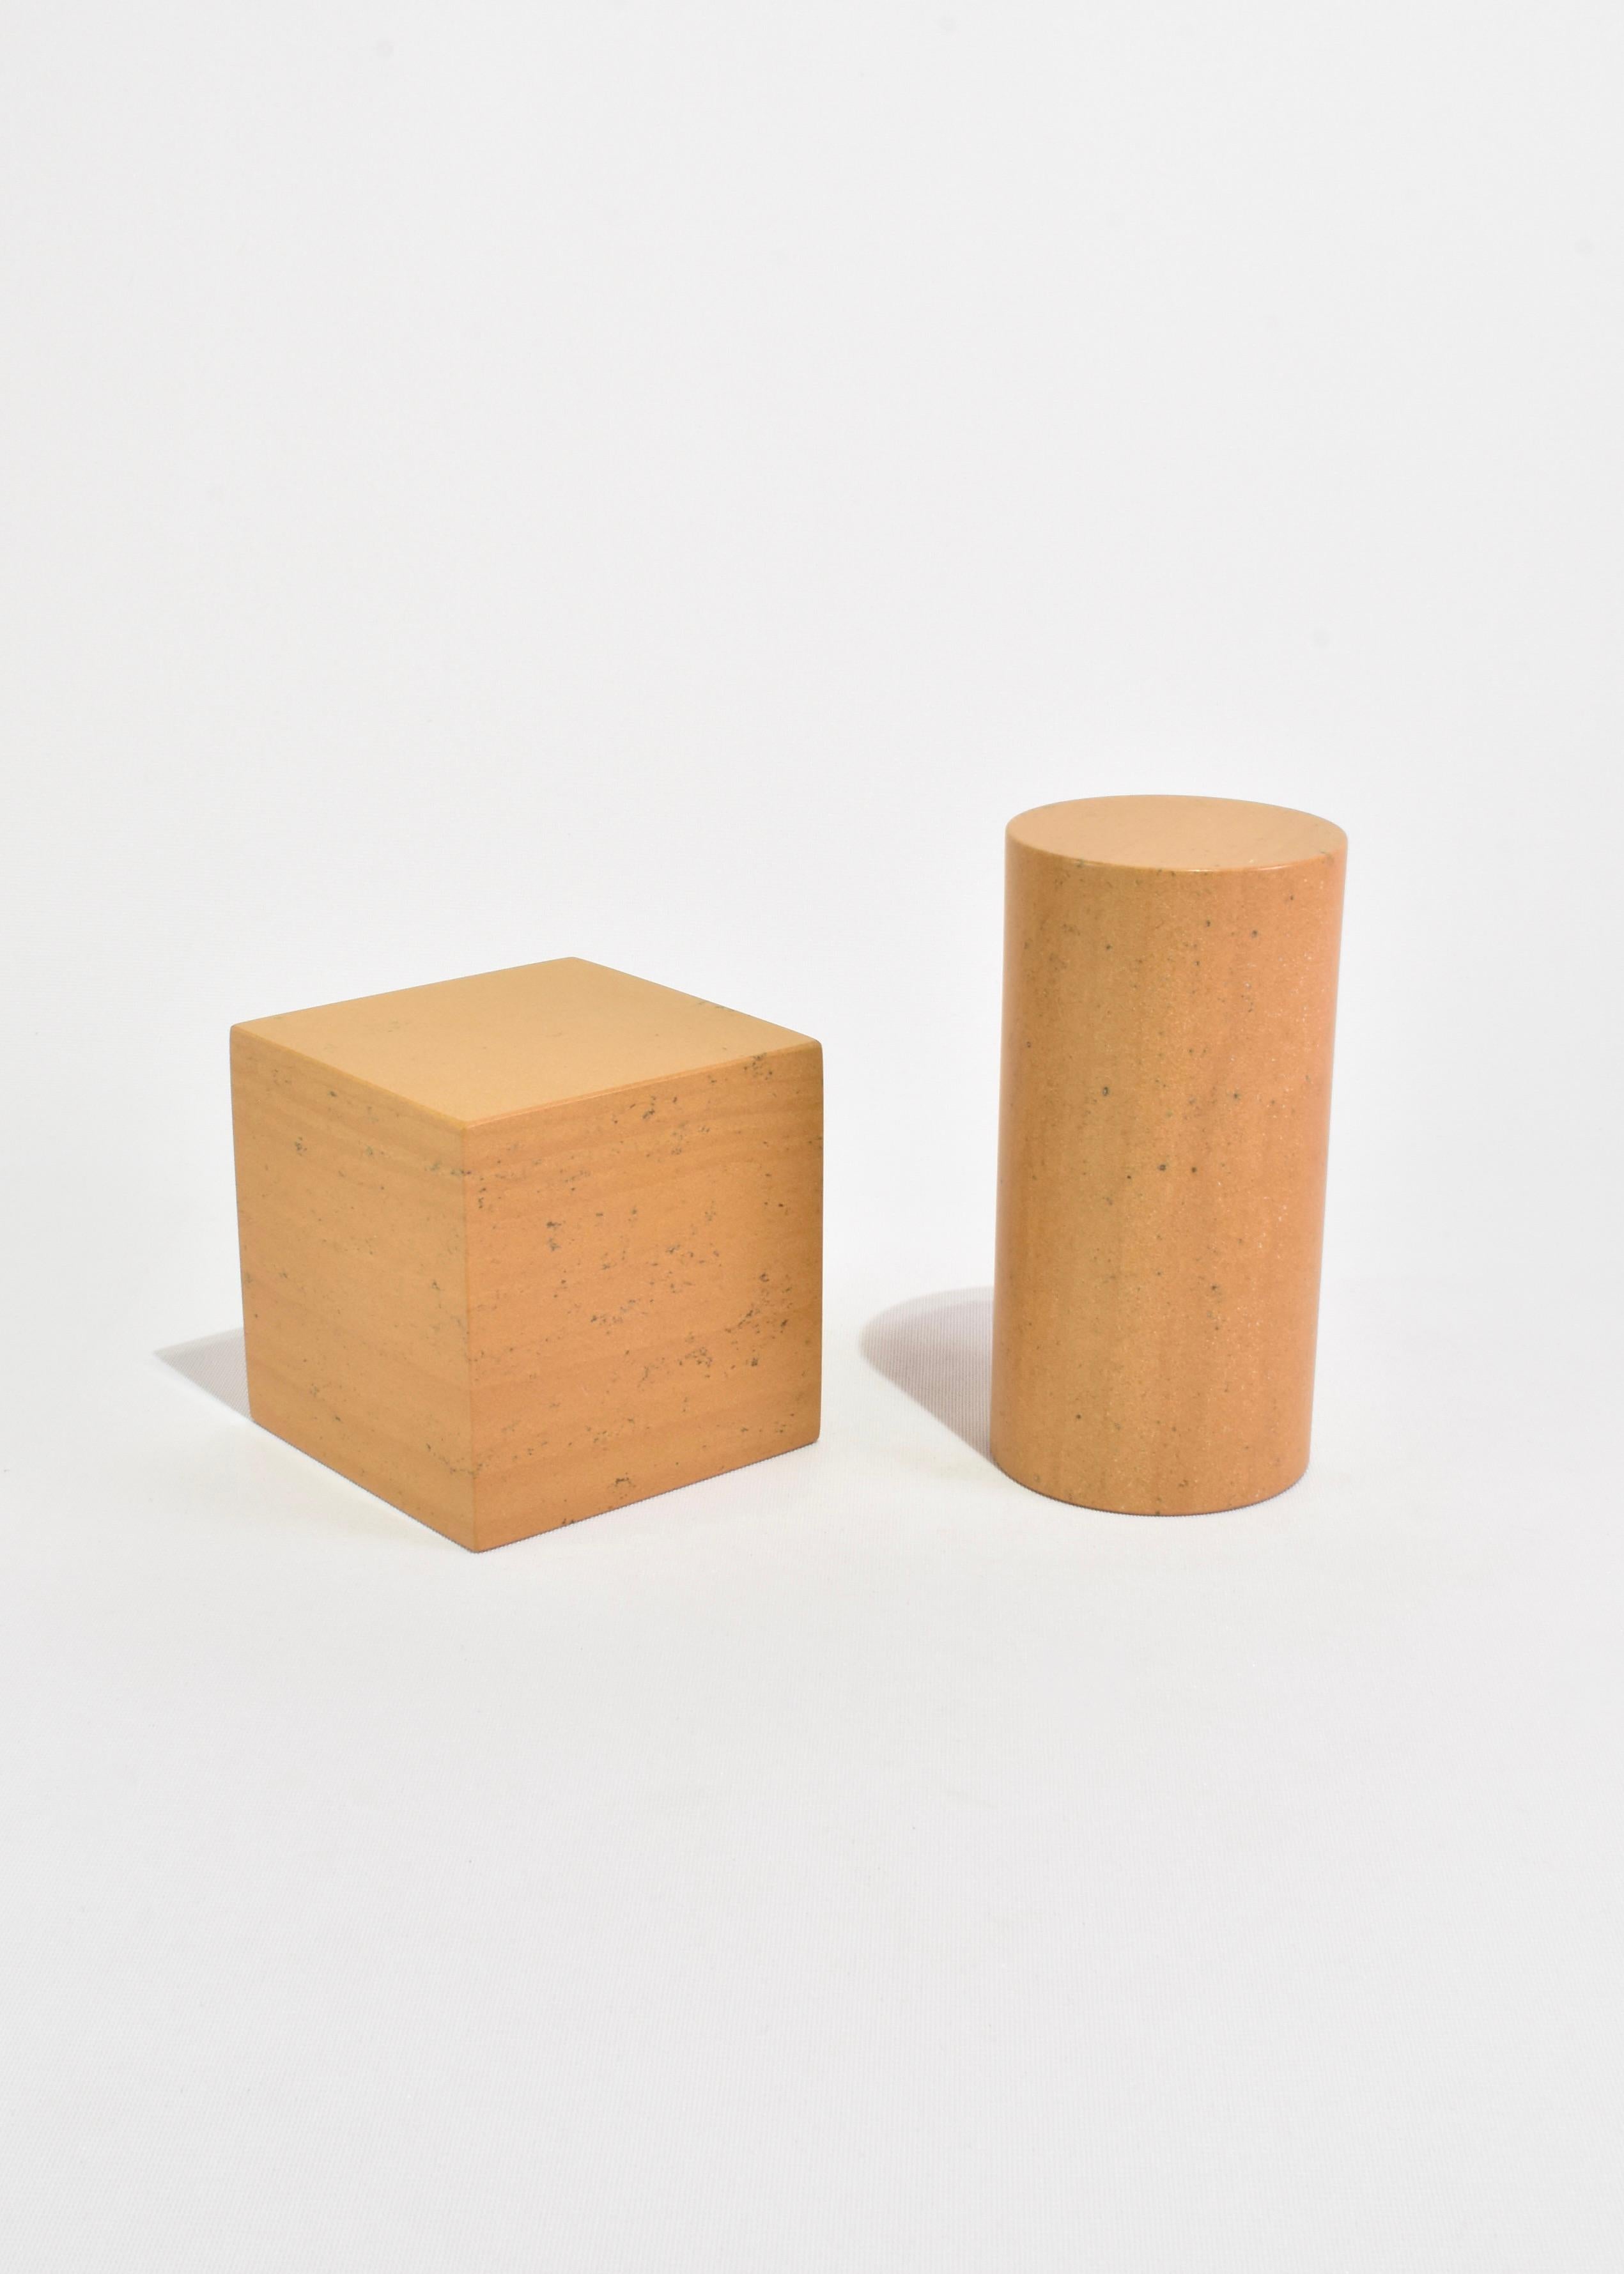 Hand-Crafted Sandstone Cube Bookend For Sale